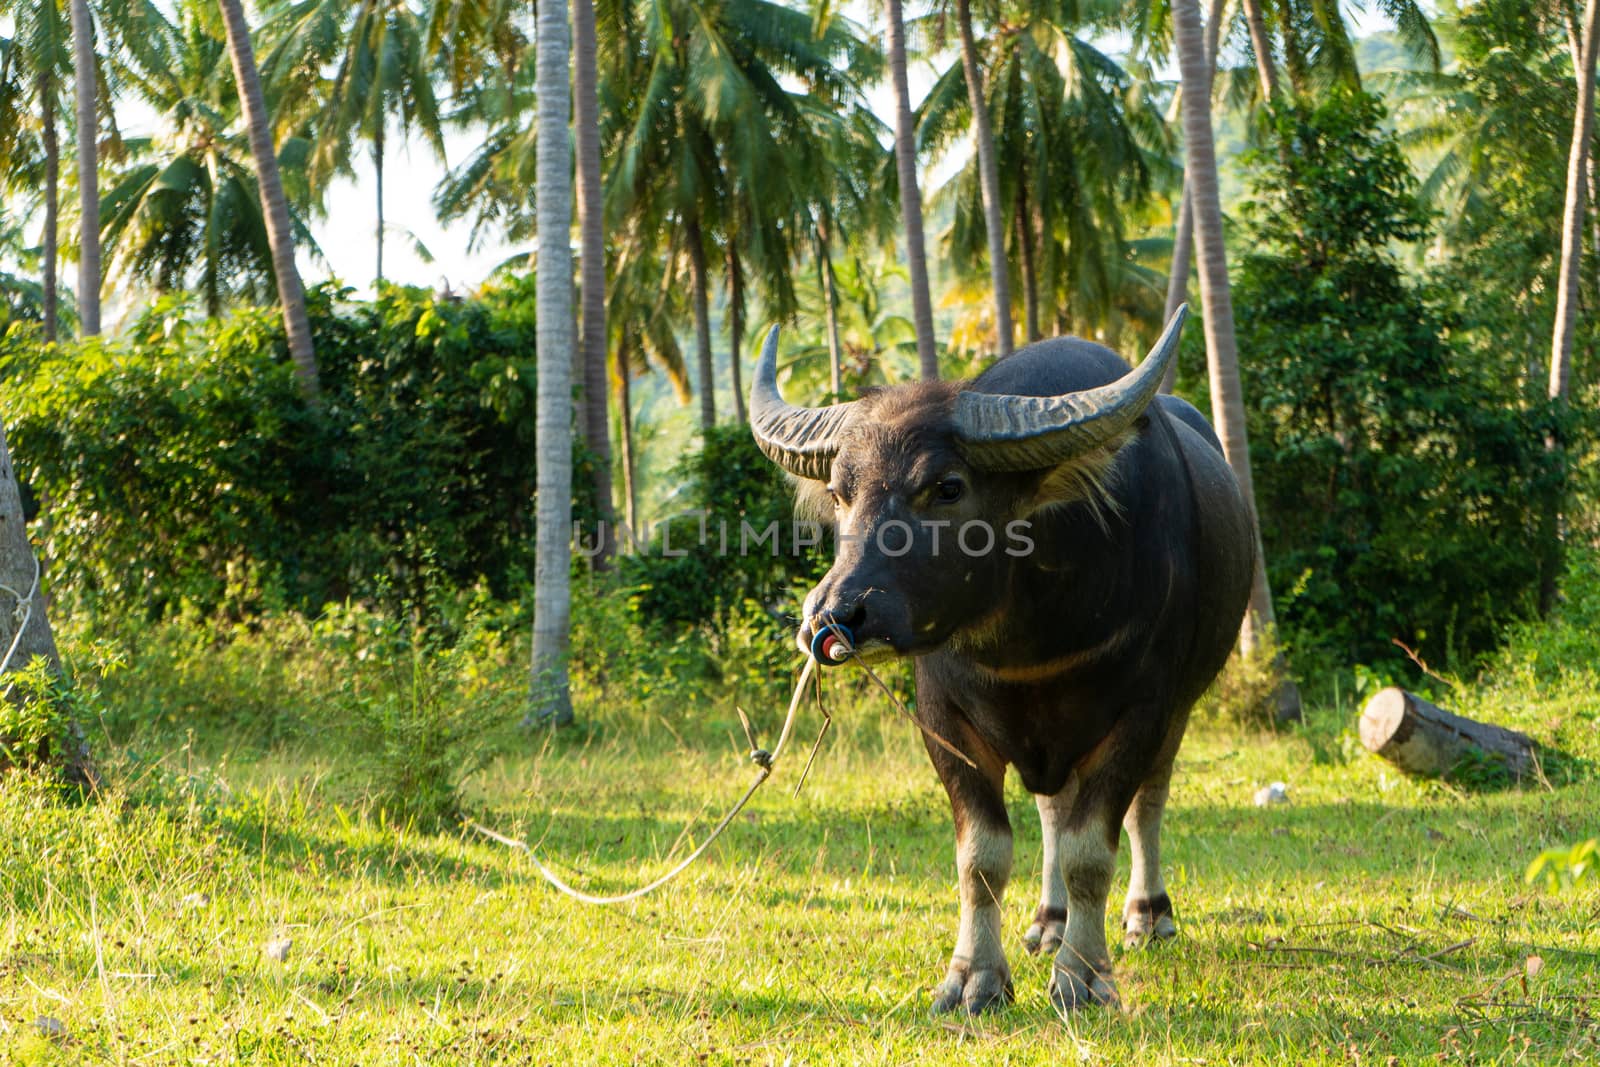 A buffalo with large horns grazes on the lawn in a green tropical jungle. by Try_my_best